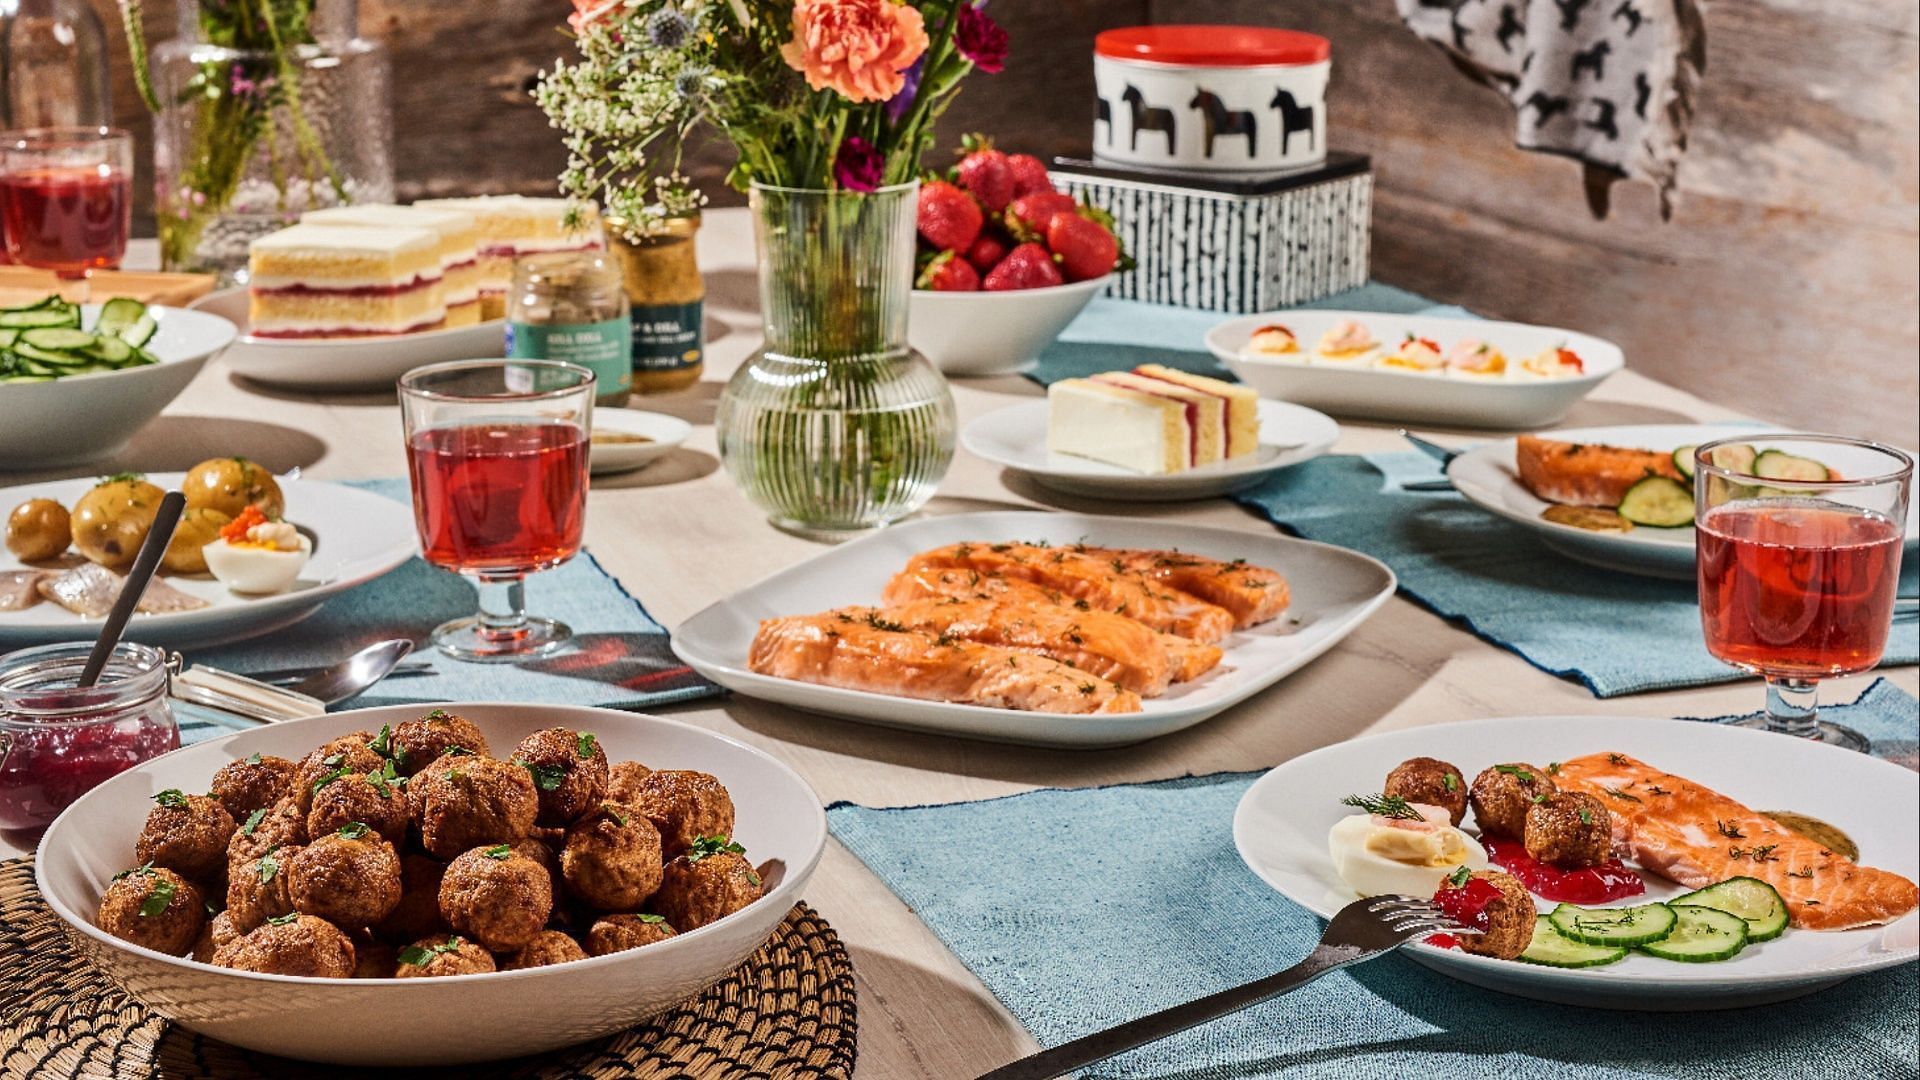 Guests can enjoy delicious Scandinavian treats on June 23 at the buffet at all participating locations (Image via IKEA)